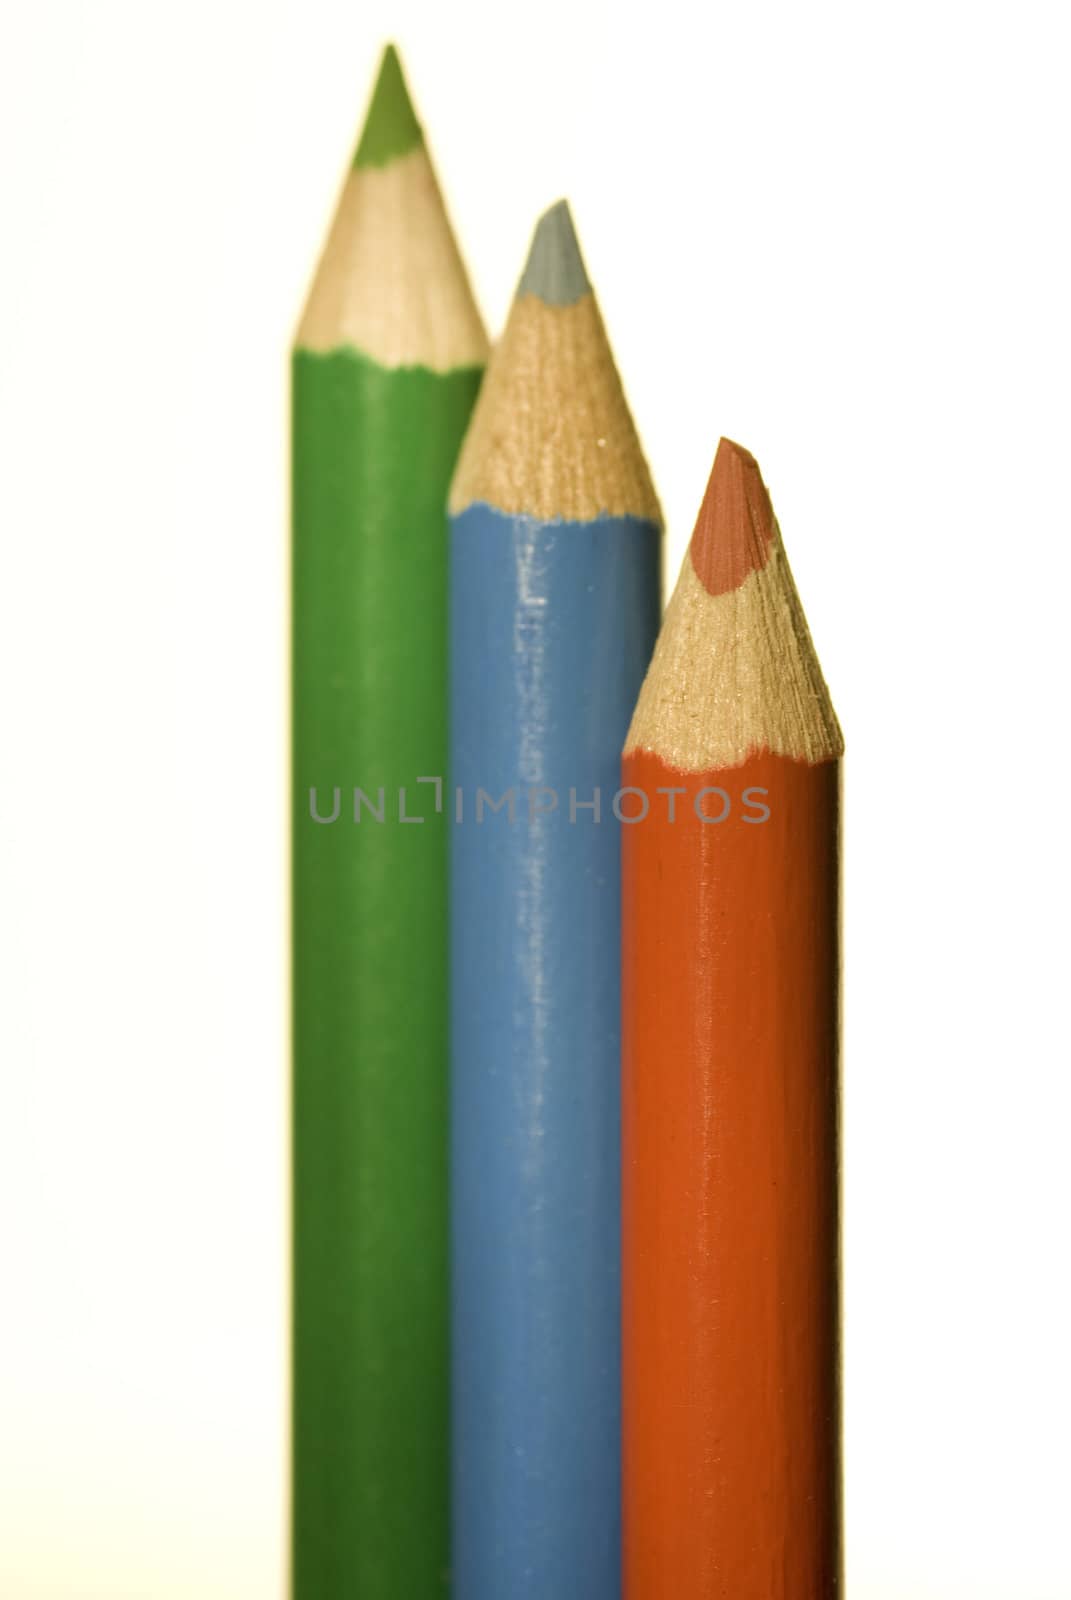 3 pens in different colors, childs toy